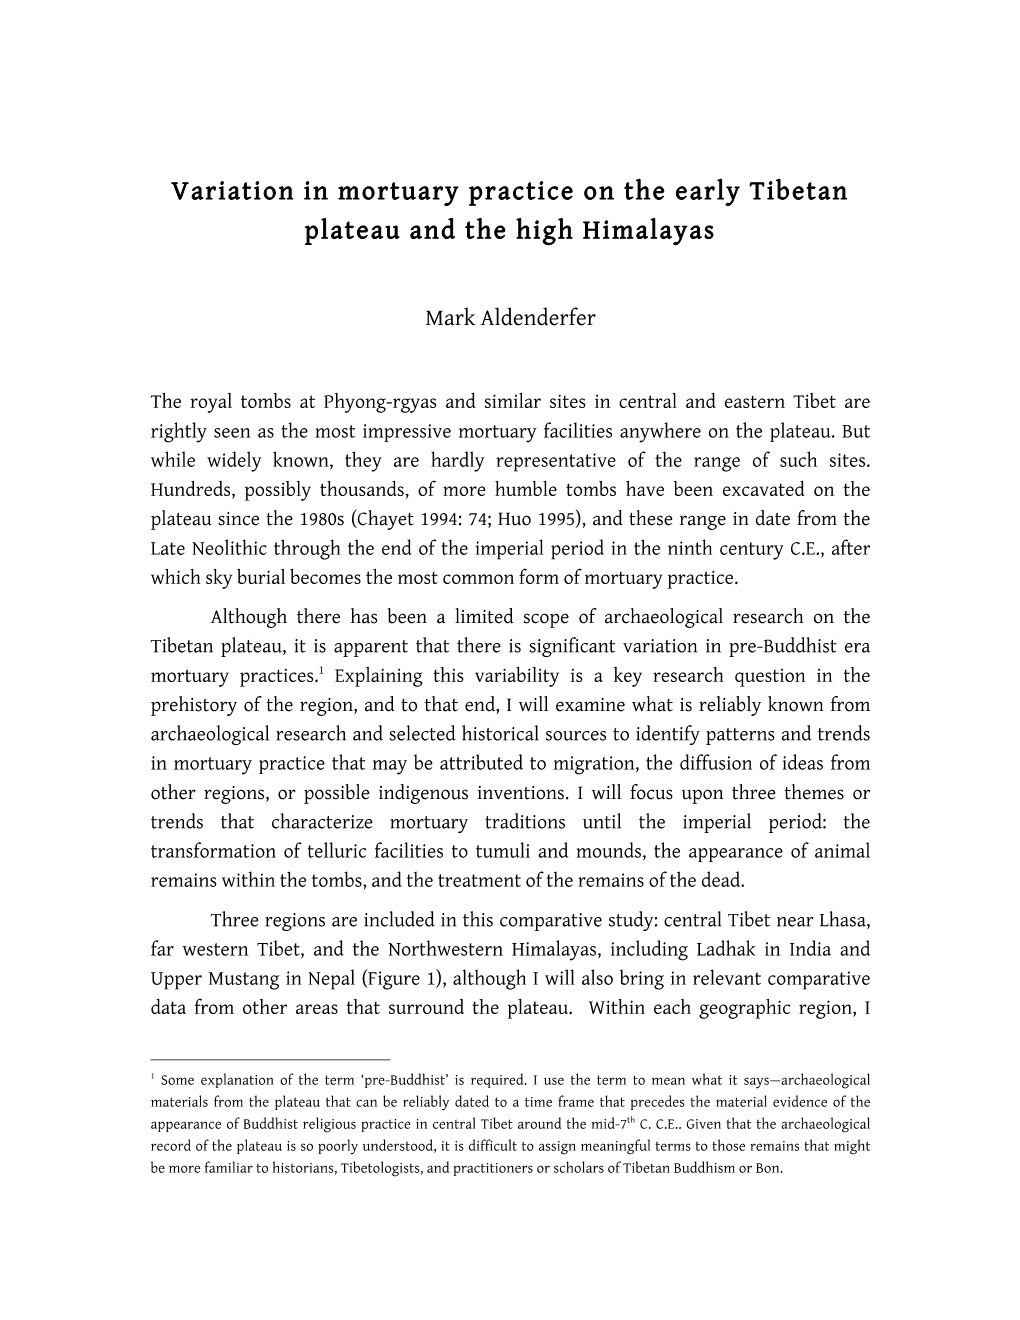 Variation in Mortuary Practice on the Early Tibetan Plateau and the High Himalayas